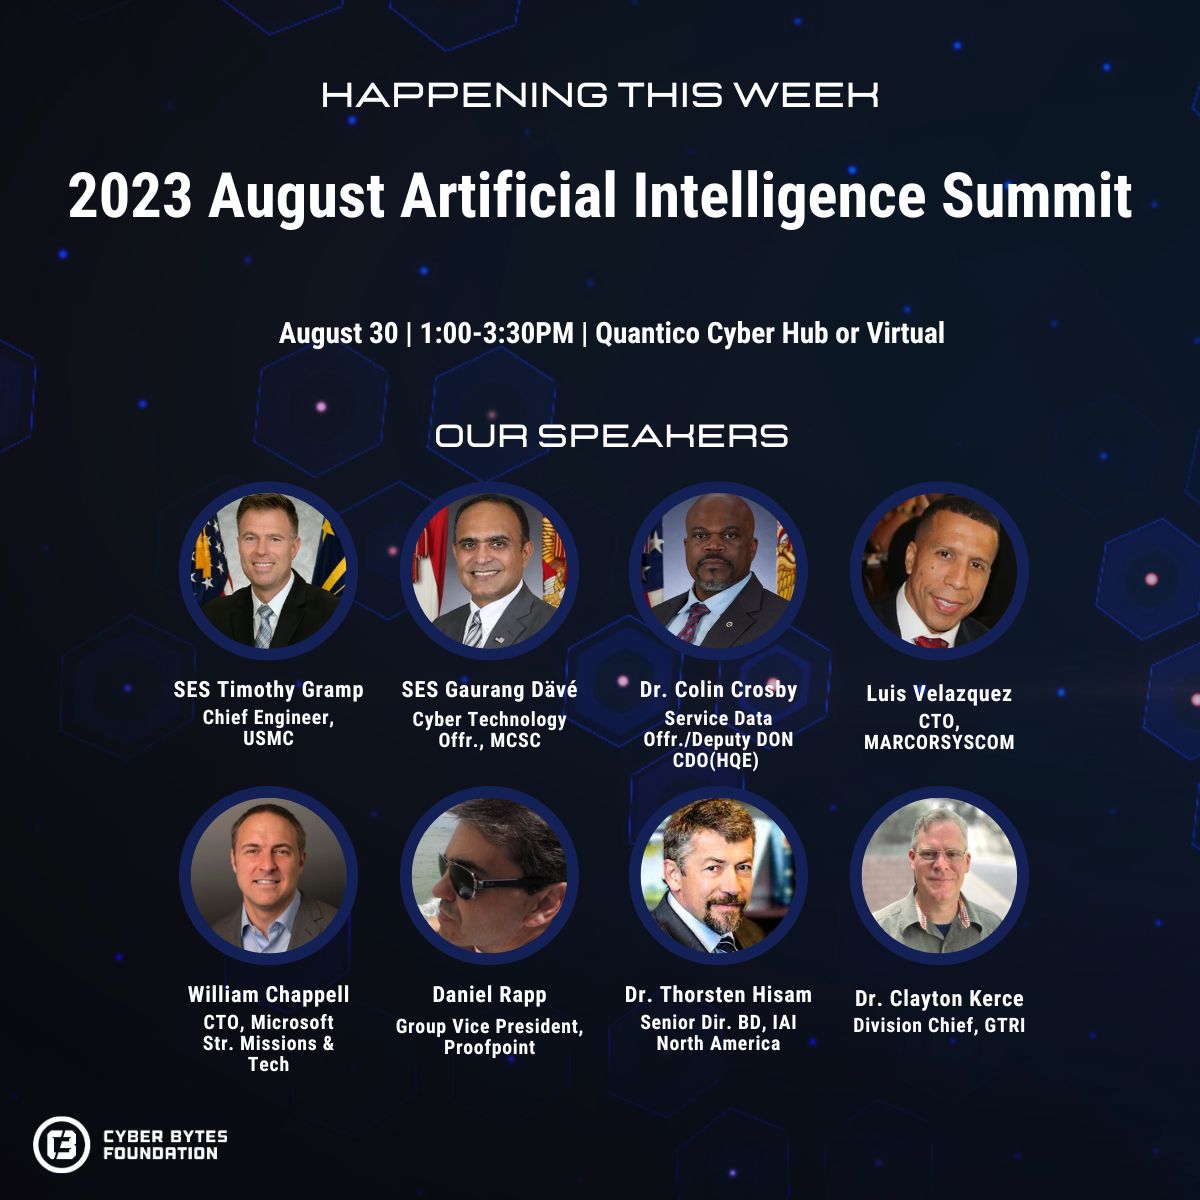 Coming up this week at the Quantico Cyber Hub, don't forget to register for the 2023 August Artificial Intelligence Summit discussing the strategic implementation of AI throughout the enterprise. Click the link below and register : lnkd.in/eem6C4zE